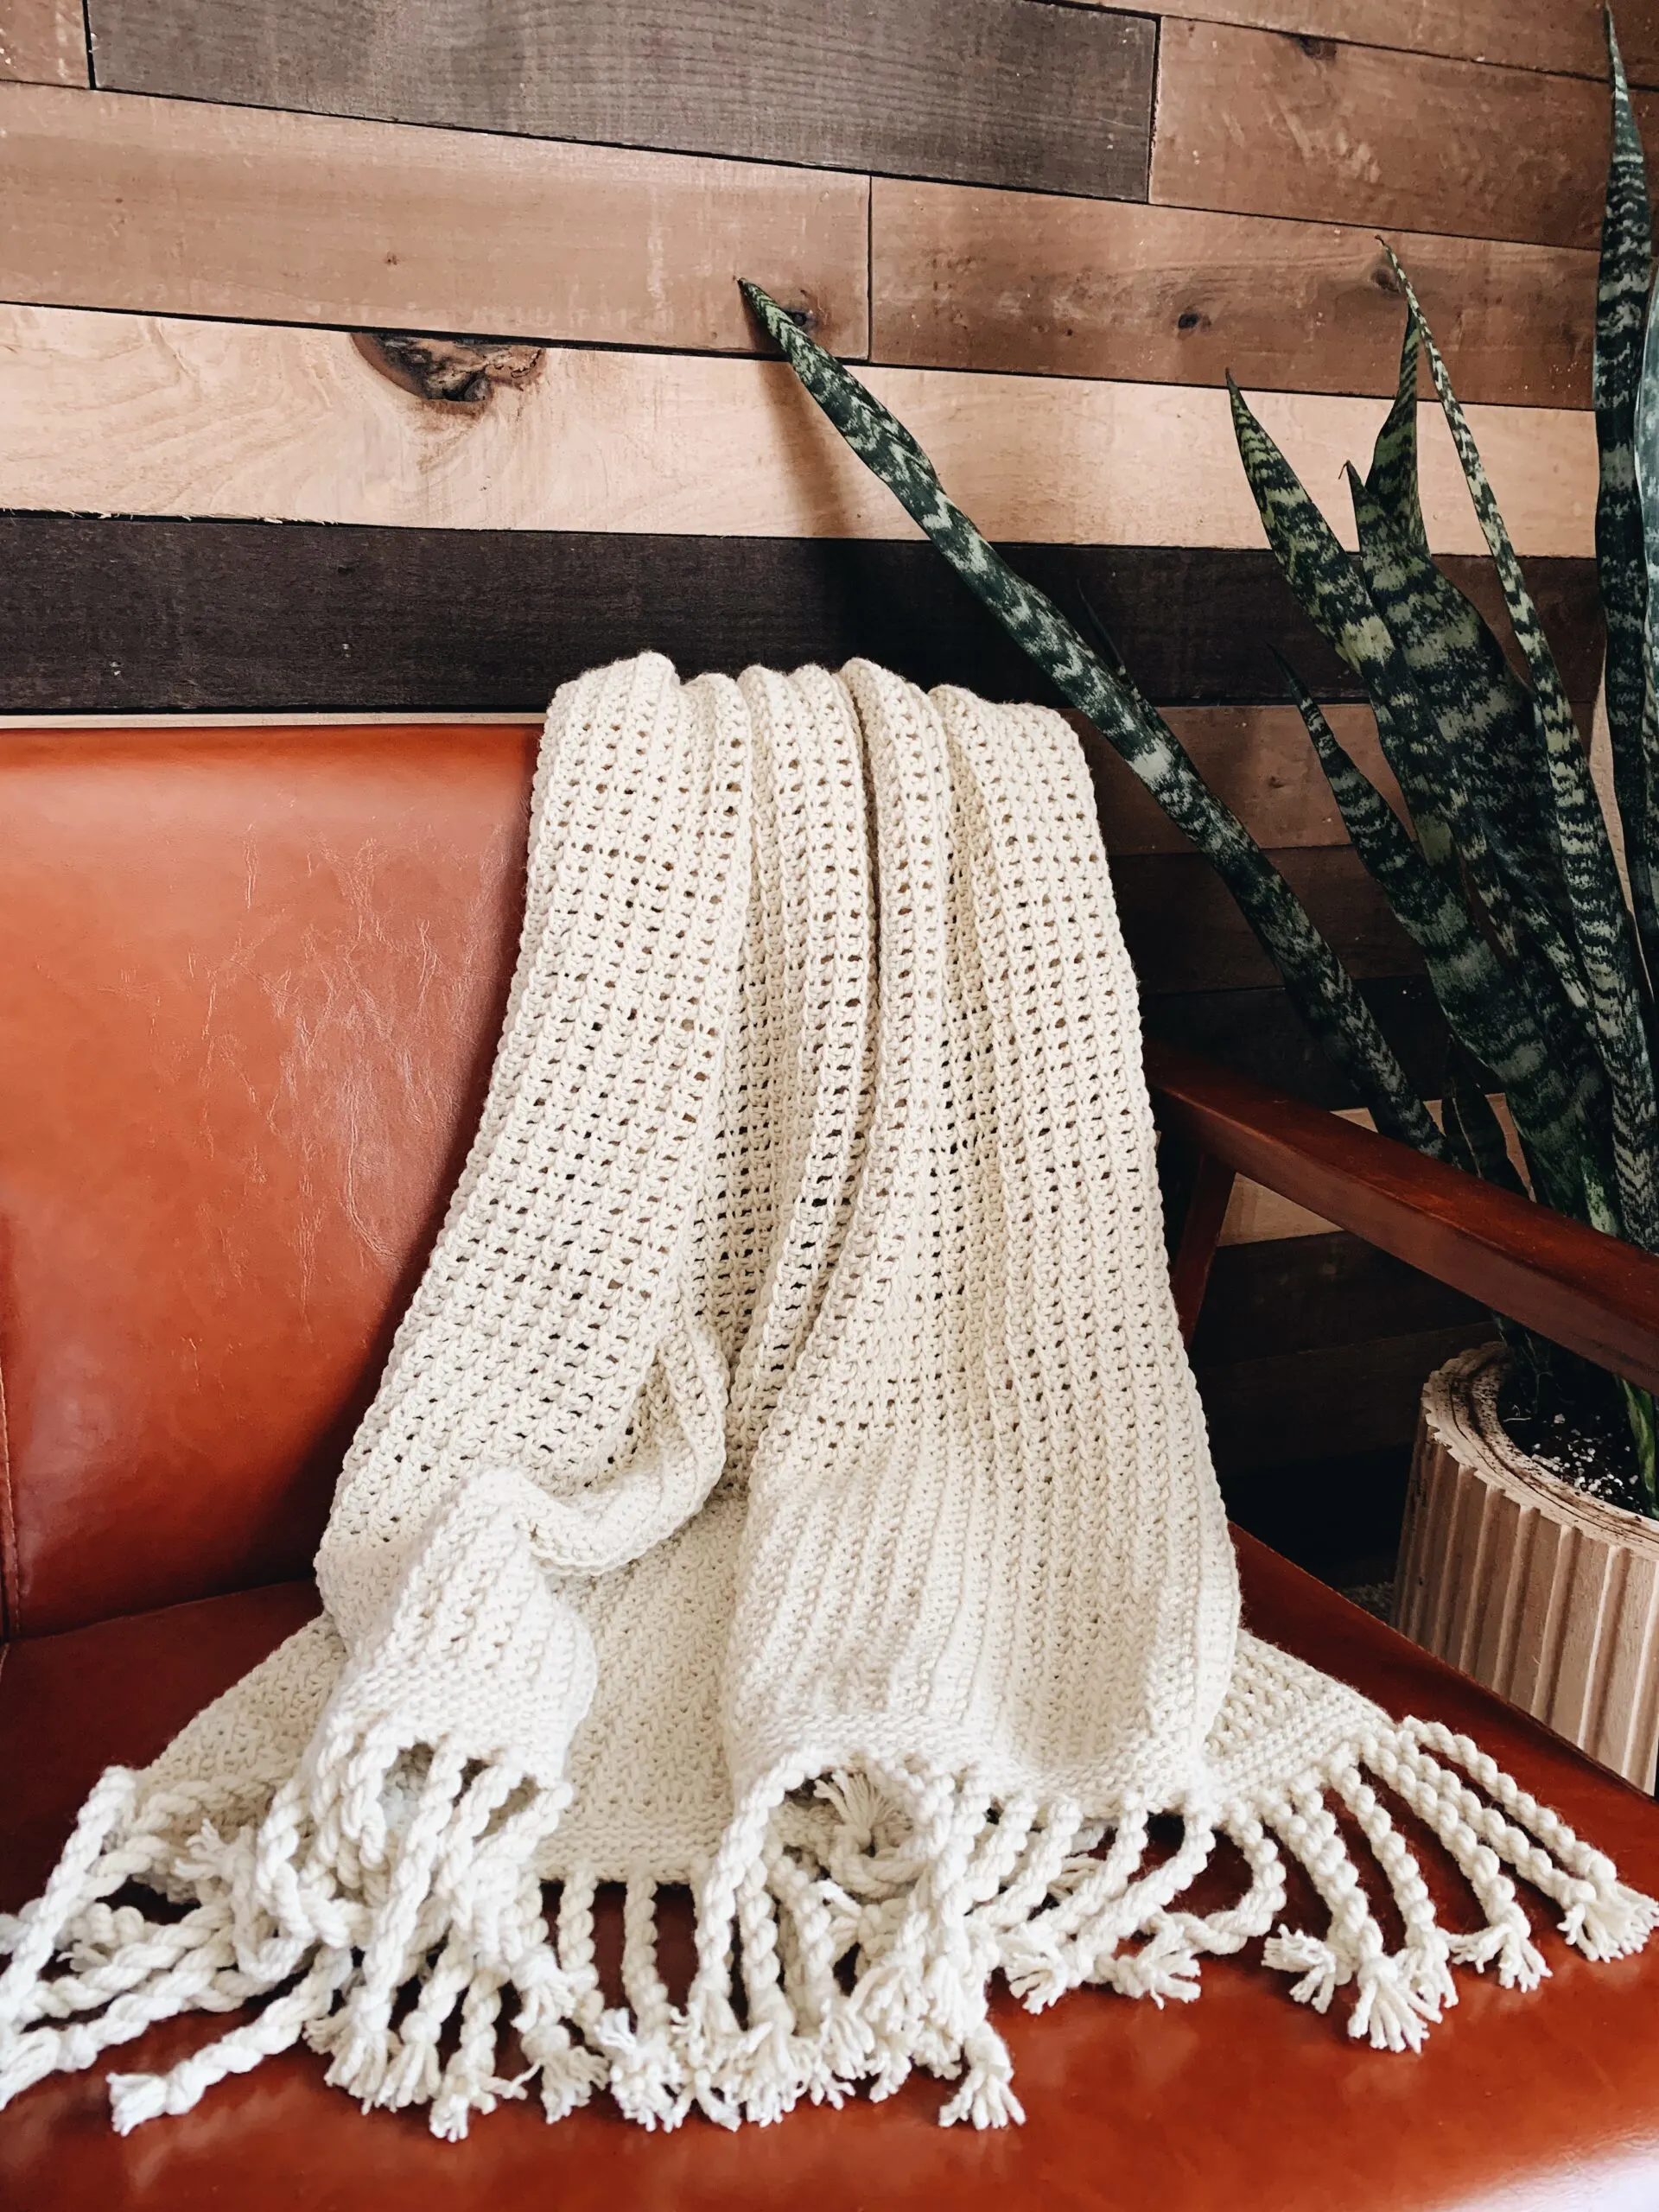 The Best Yarn for Dishcloths and Washcloths — byGoldenberry